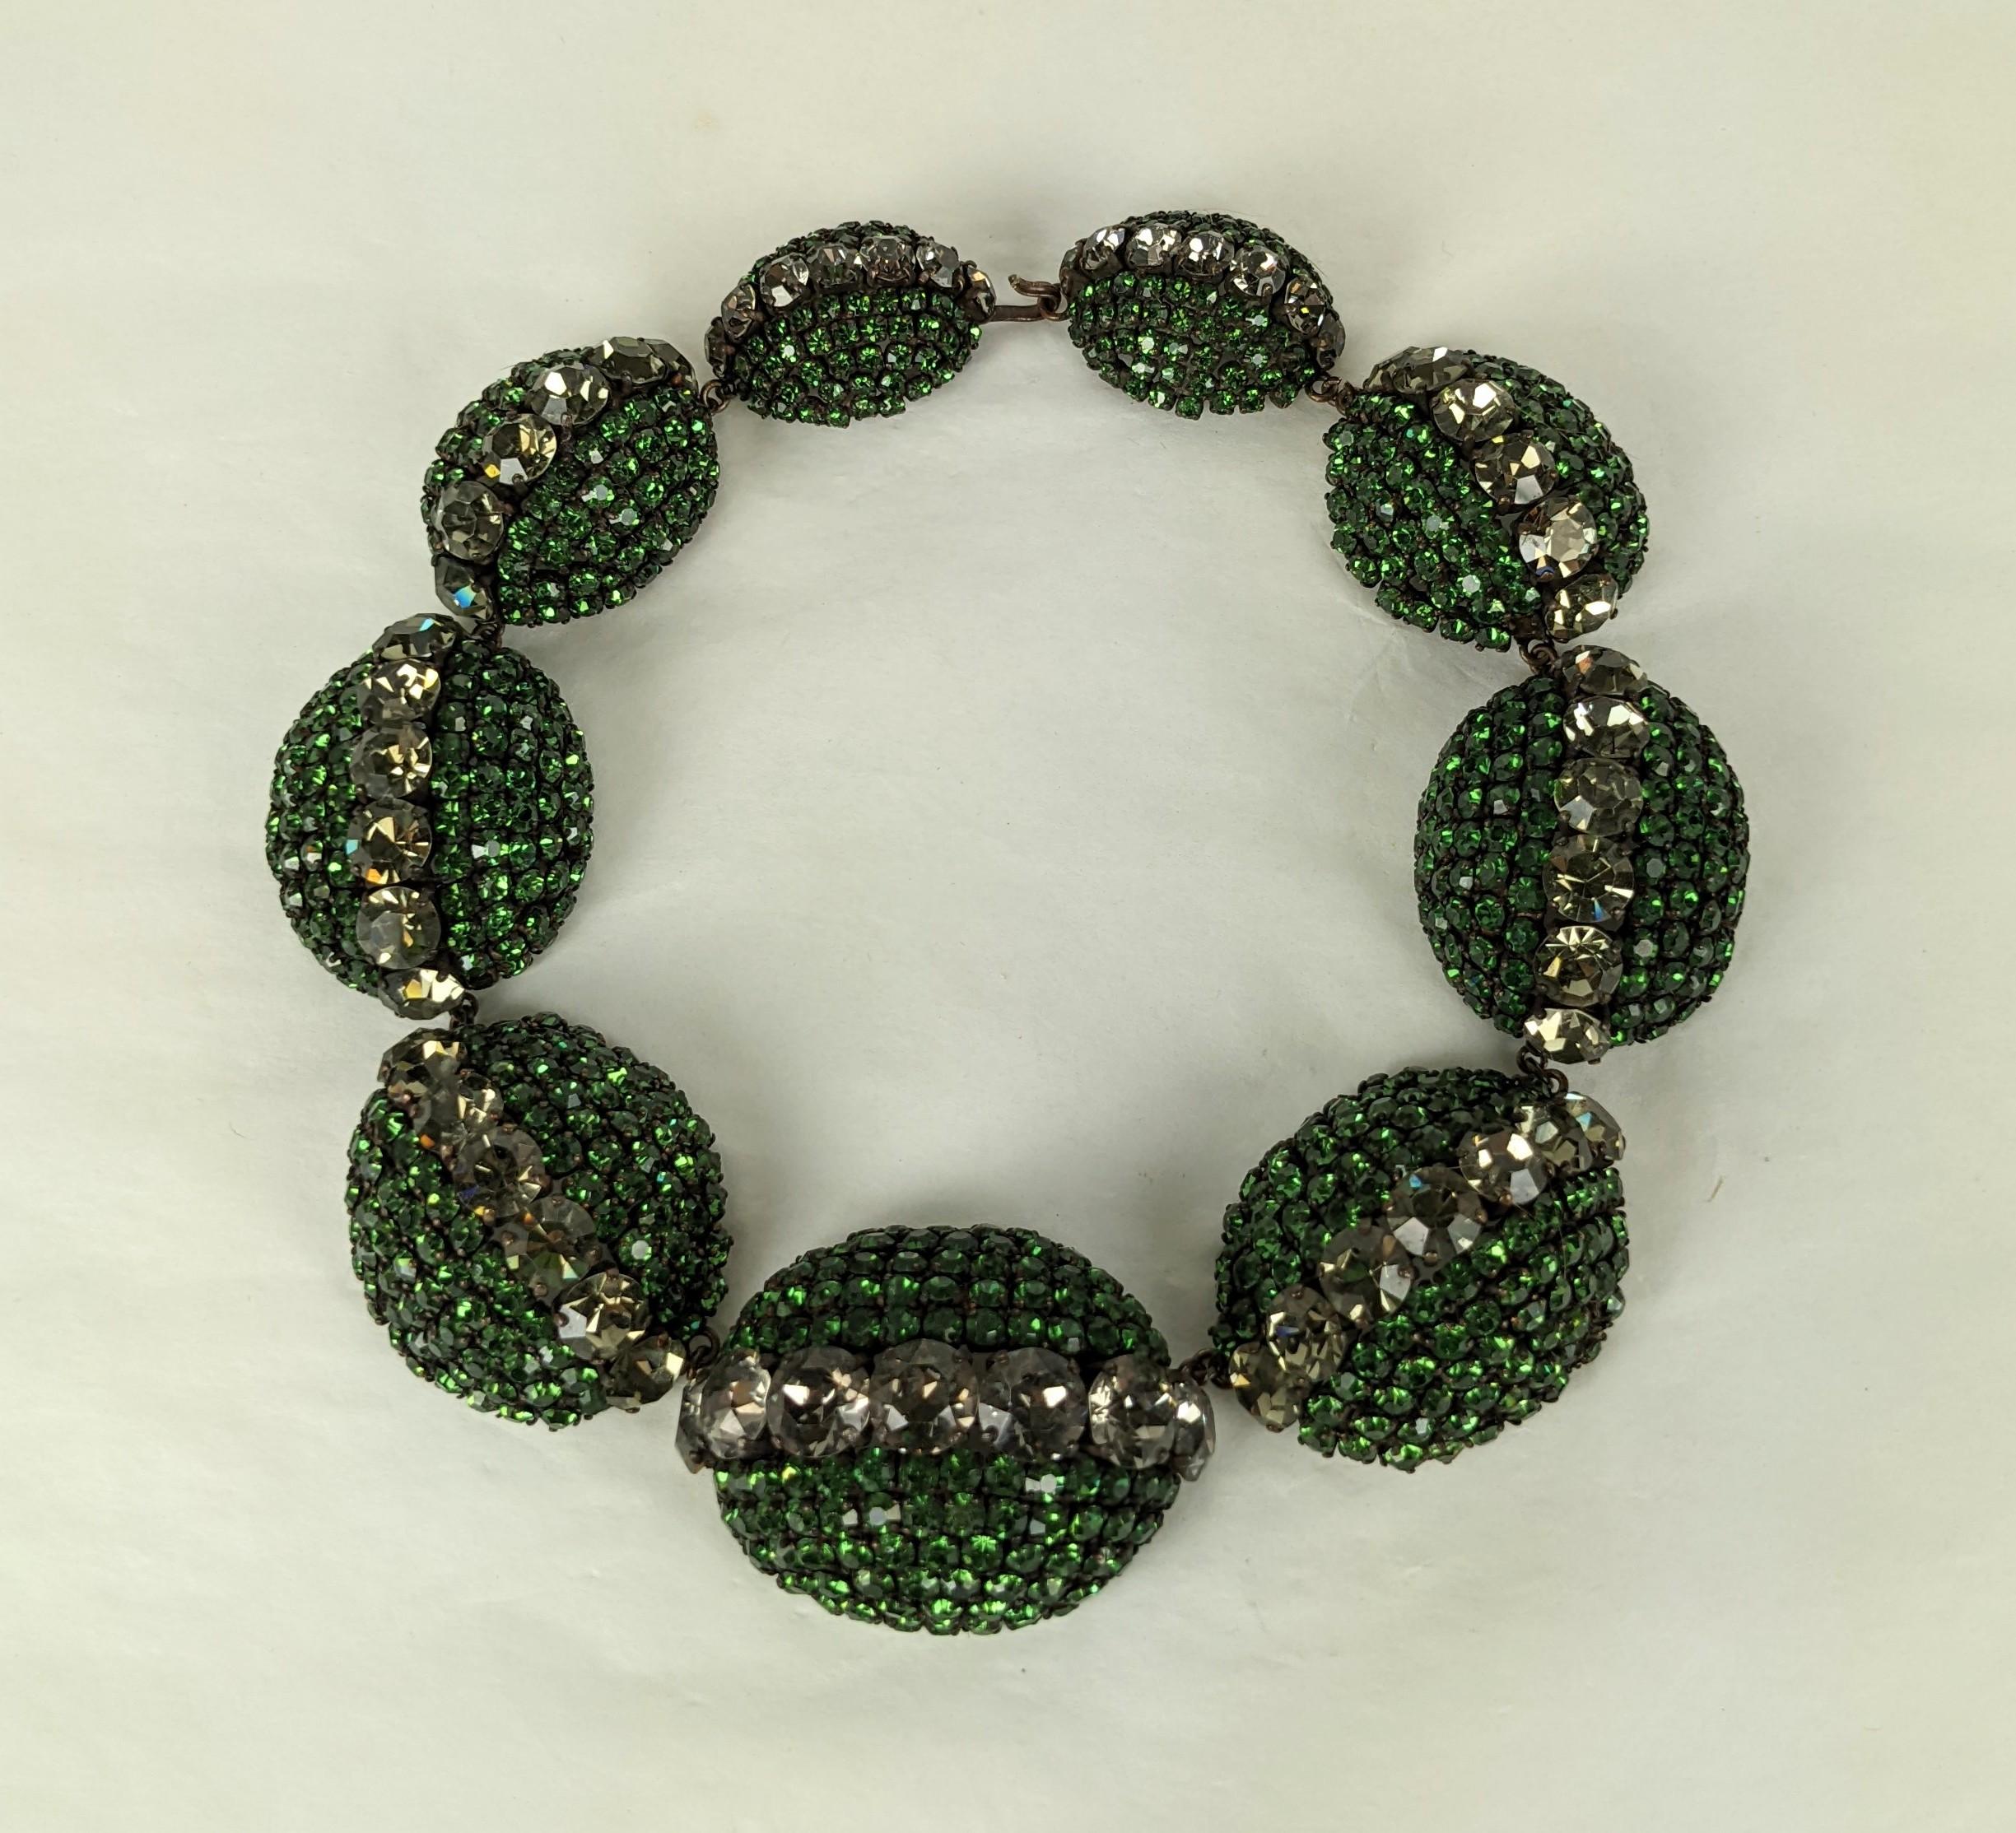 Extraordinary Balenciaga Bunny Mellon Haute Couture choker necklace. Composed of graduated eliptical domes of japanned bronze metal with hand prong set graduated olivine emerald Swarovski paste stones with and large grey crystals running down the